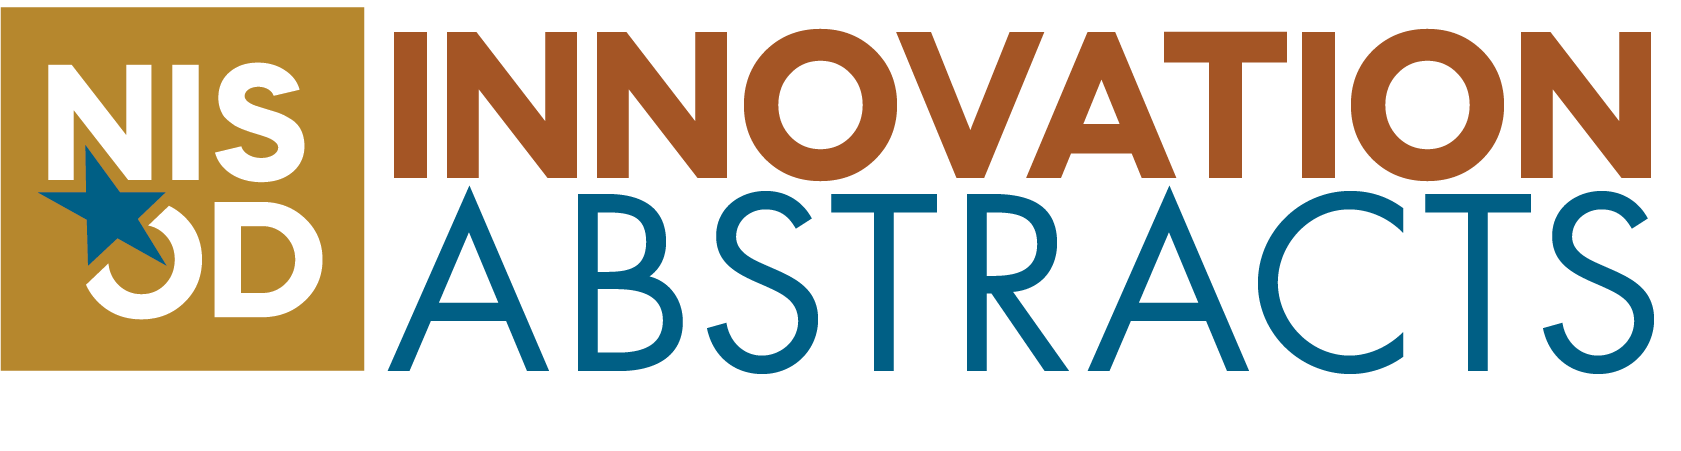 Innovation Abstracts Banner